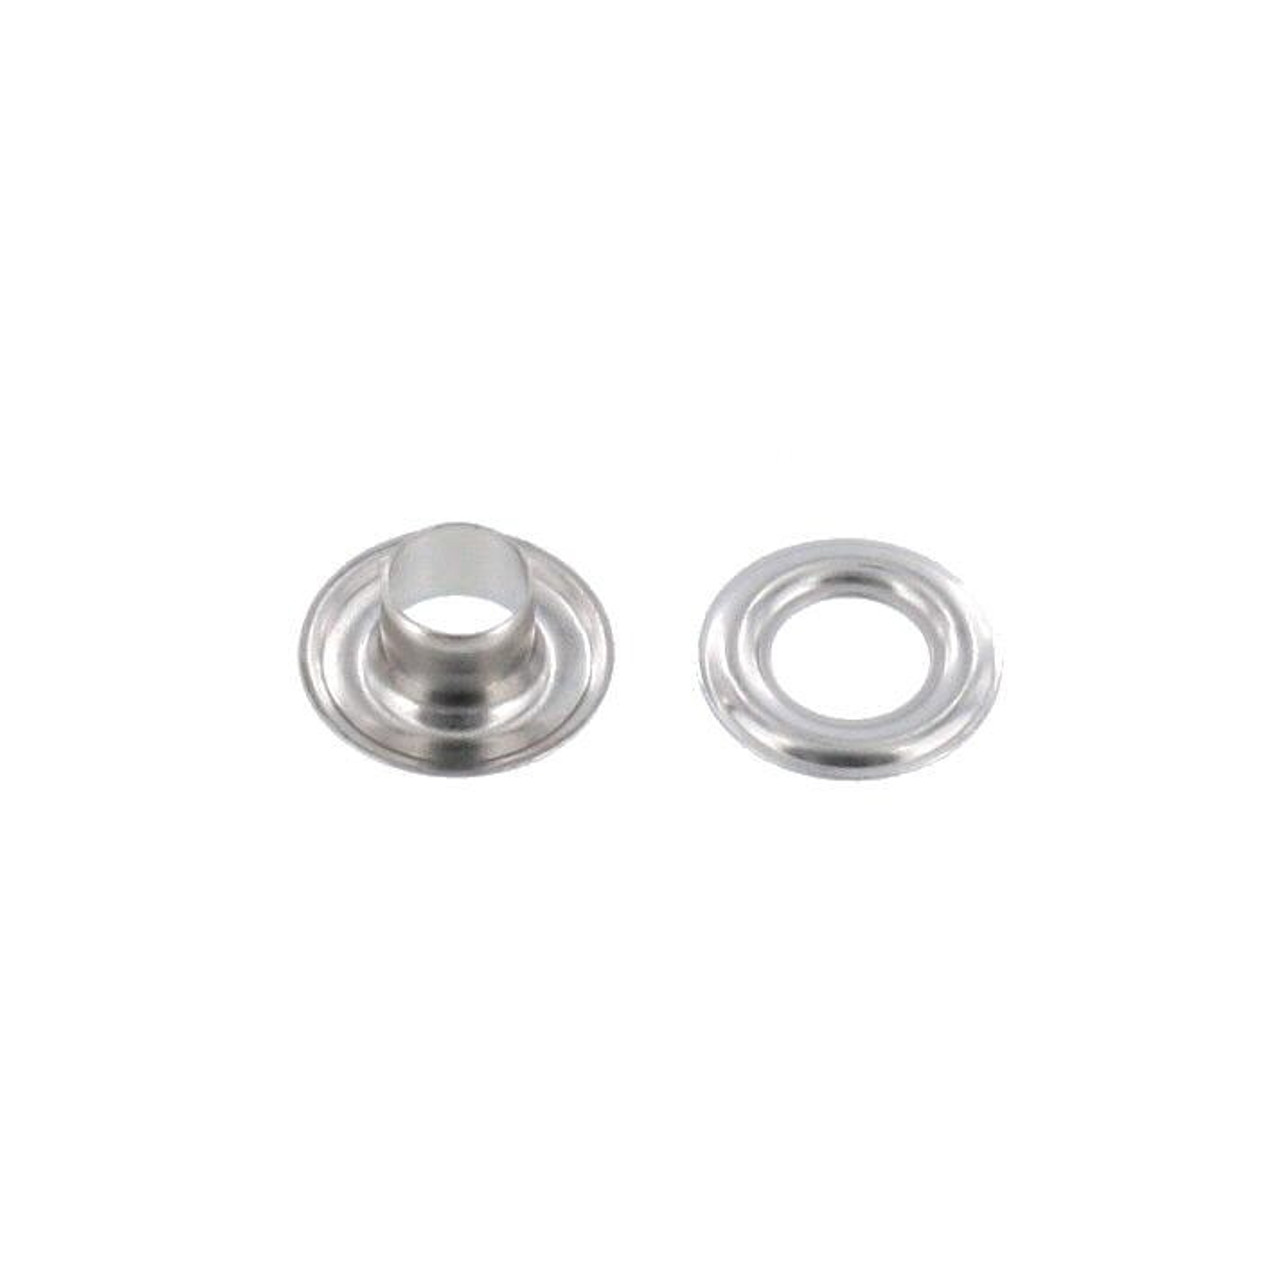 ▷ Eyelets and Grommets - 15 mm Metal Eyelets 9/32 (250 pcs